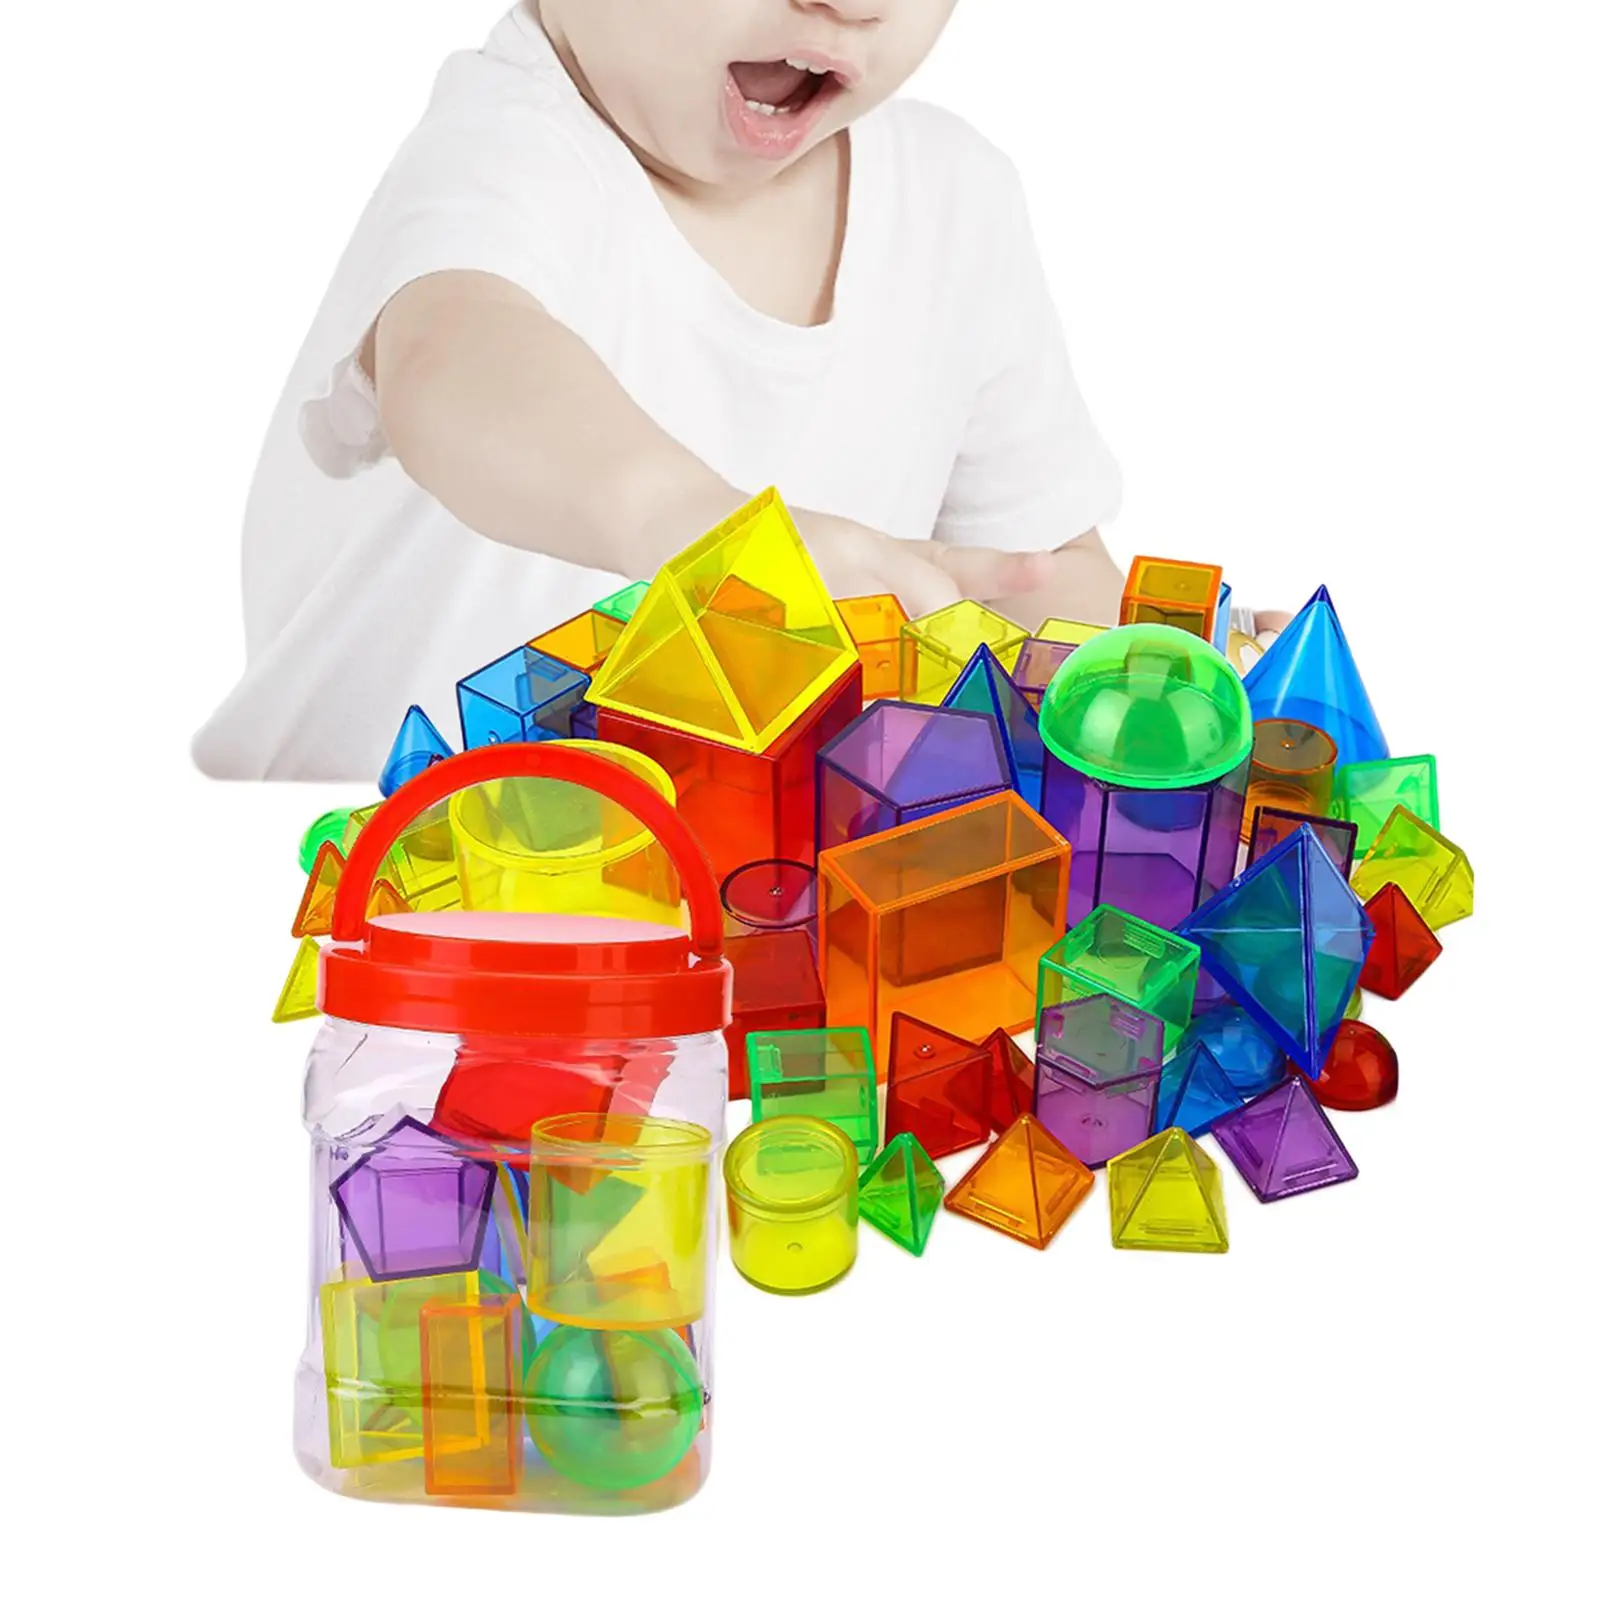 Educational Toys Sensory Parent Child Interaction Montessori Toys Puzzled For Living Room Children